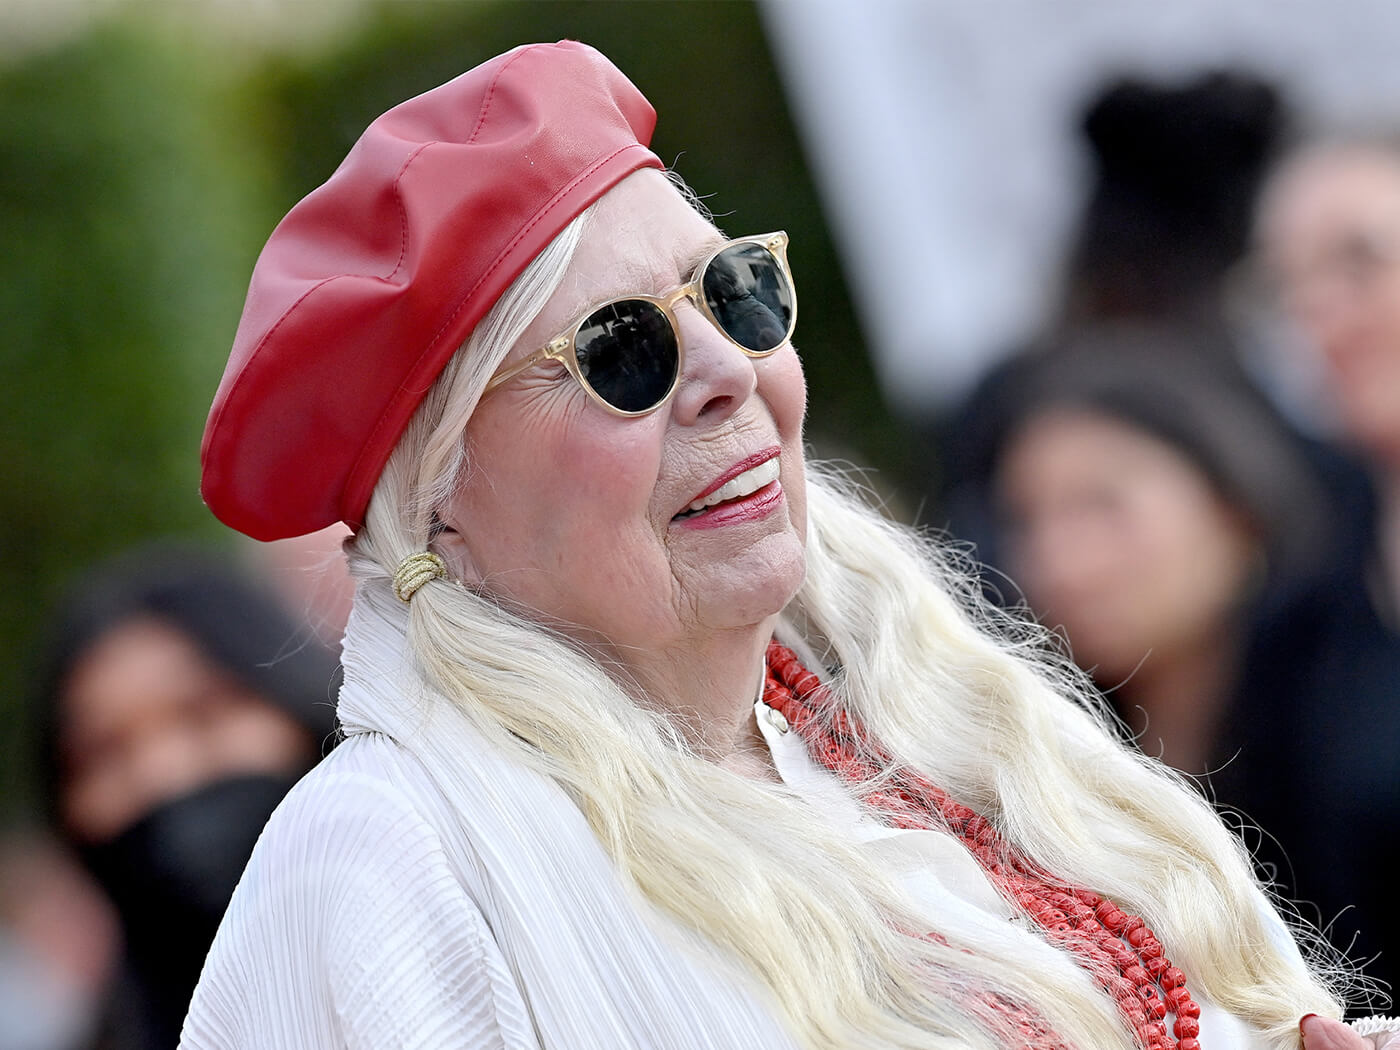 Joni Mitchell to play her first headline show in over 20 years